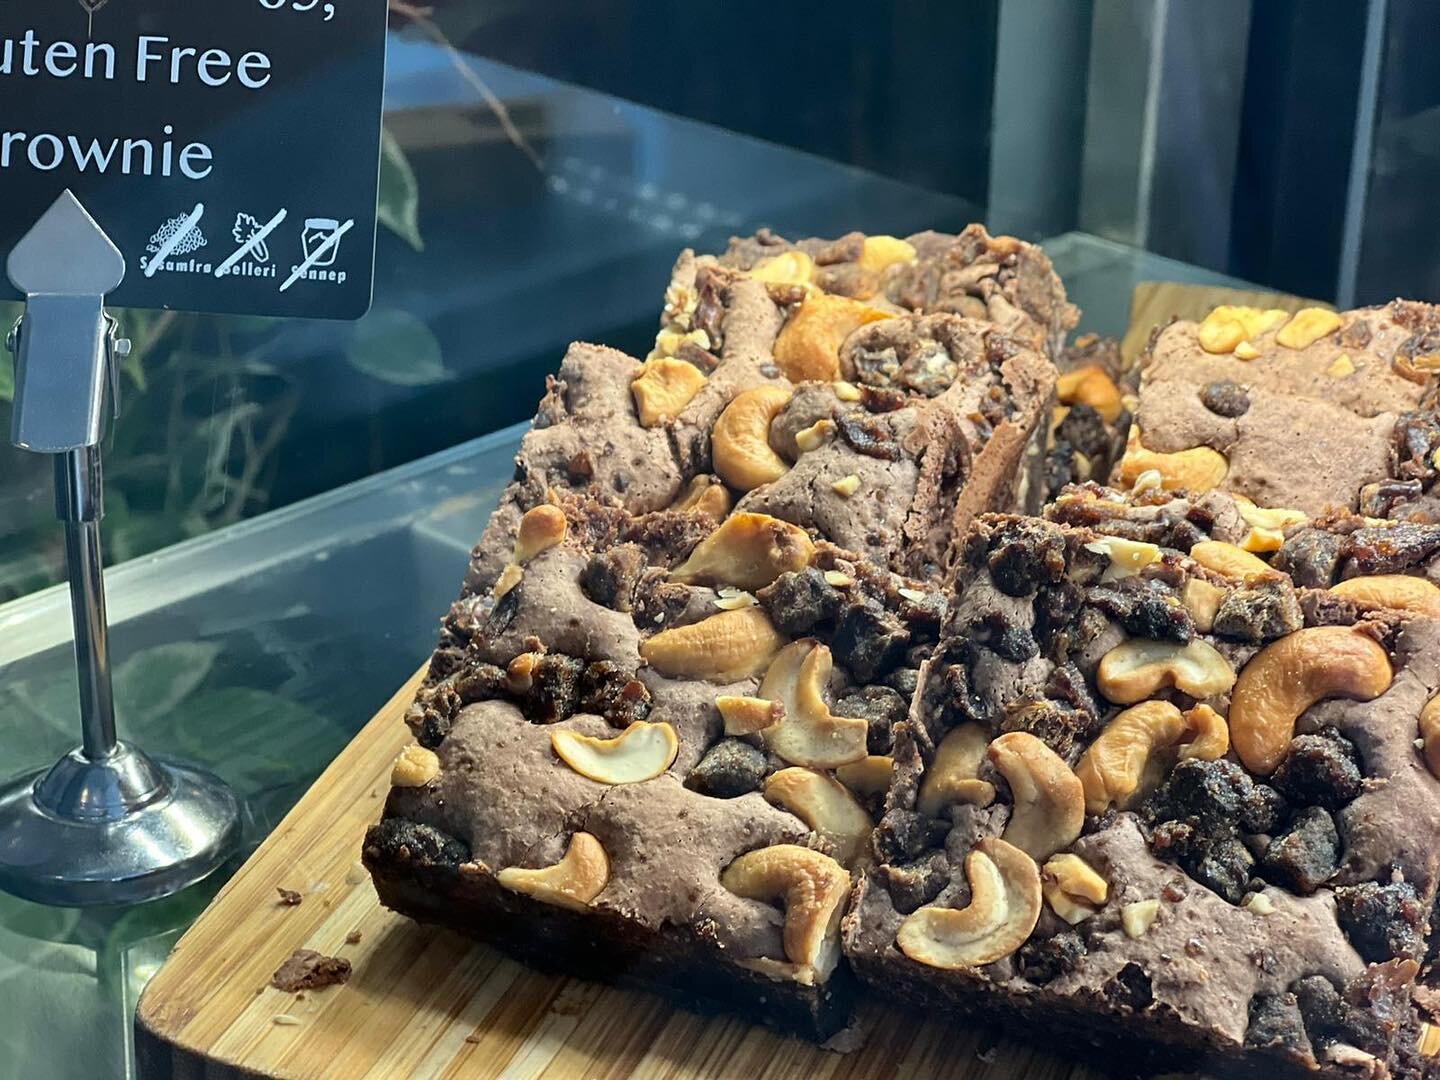 Chewy, gooey and gluten-free. Our super moist vegan brownies are packed with dates, fruits and cashews. As always, we love creating food with a combination of textures, can we interest you in a brownie? 

Tag a brownie lover in the comments👇.

#Nord